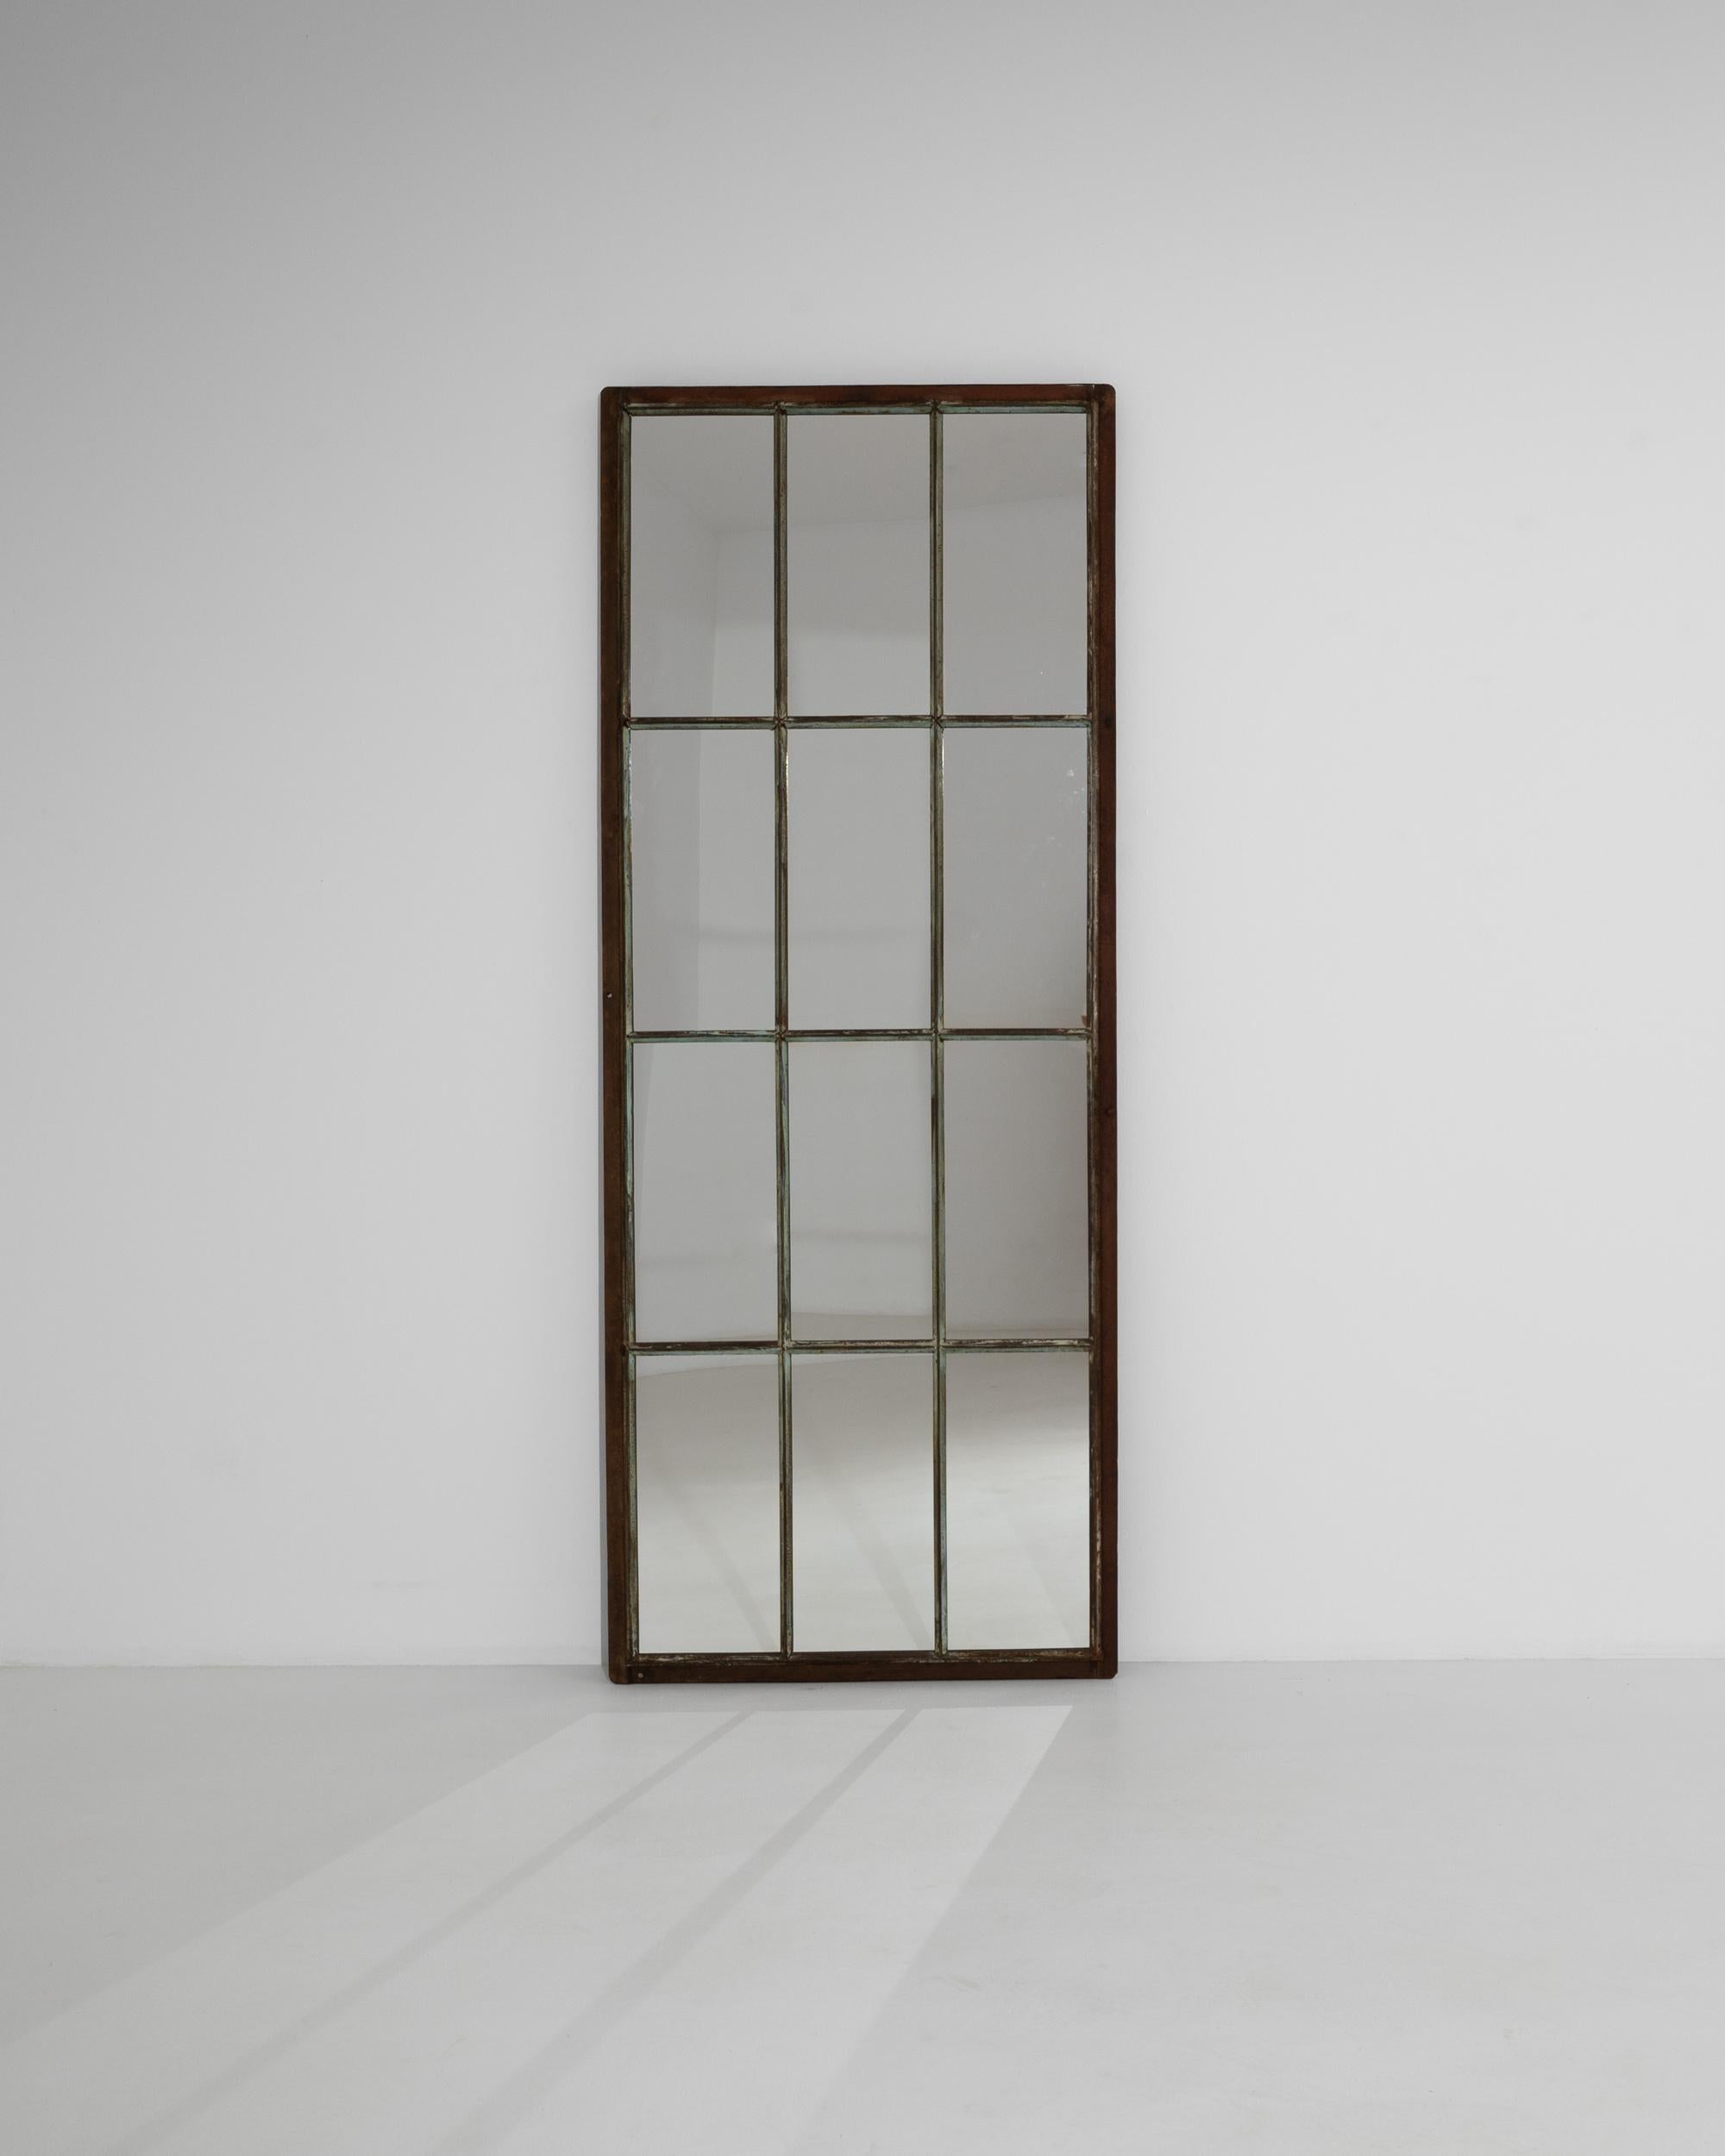 Originally used as factory windows, the long proportions and stripped back simplicity of this vintage mirror makes for a unique Industrial accent. Made in 20th century France, the grid-like form mimics a mullioned window, while the large proportions